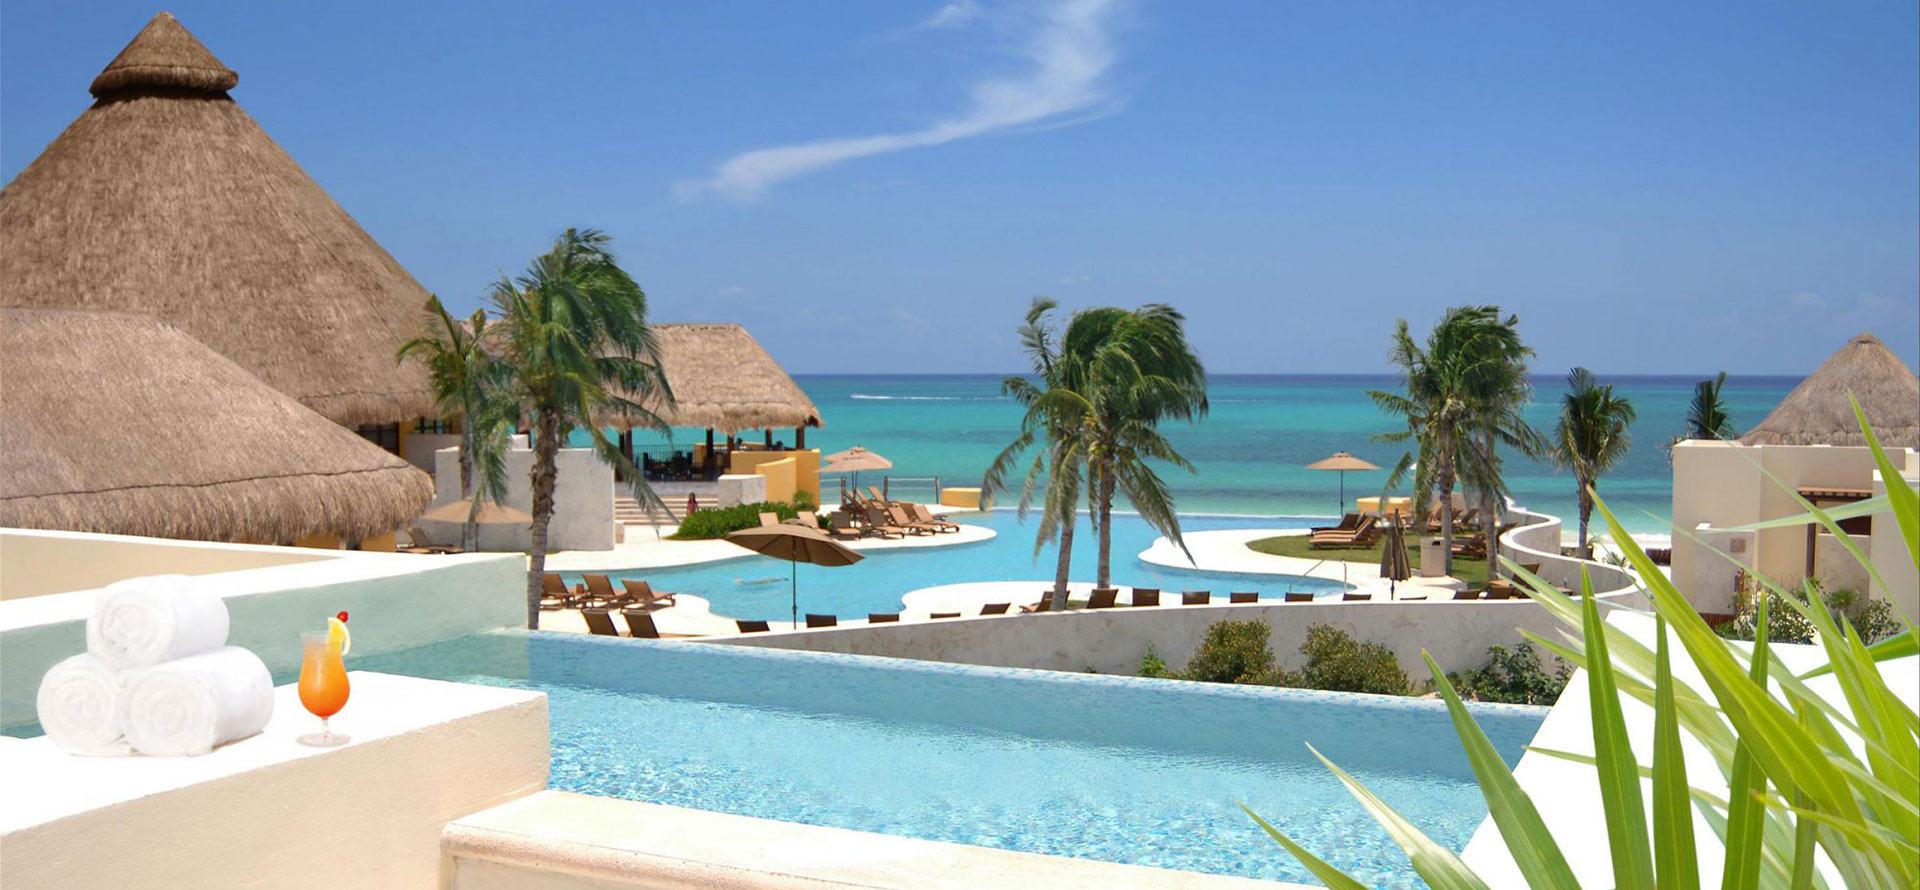 Variant of all inclusive tulum vacation.